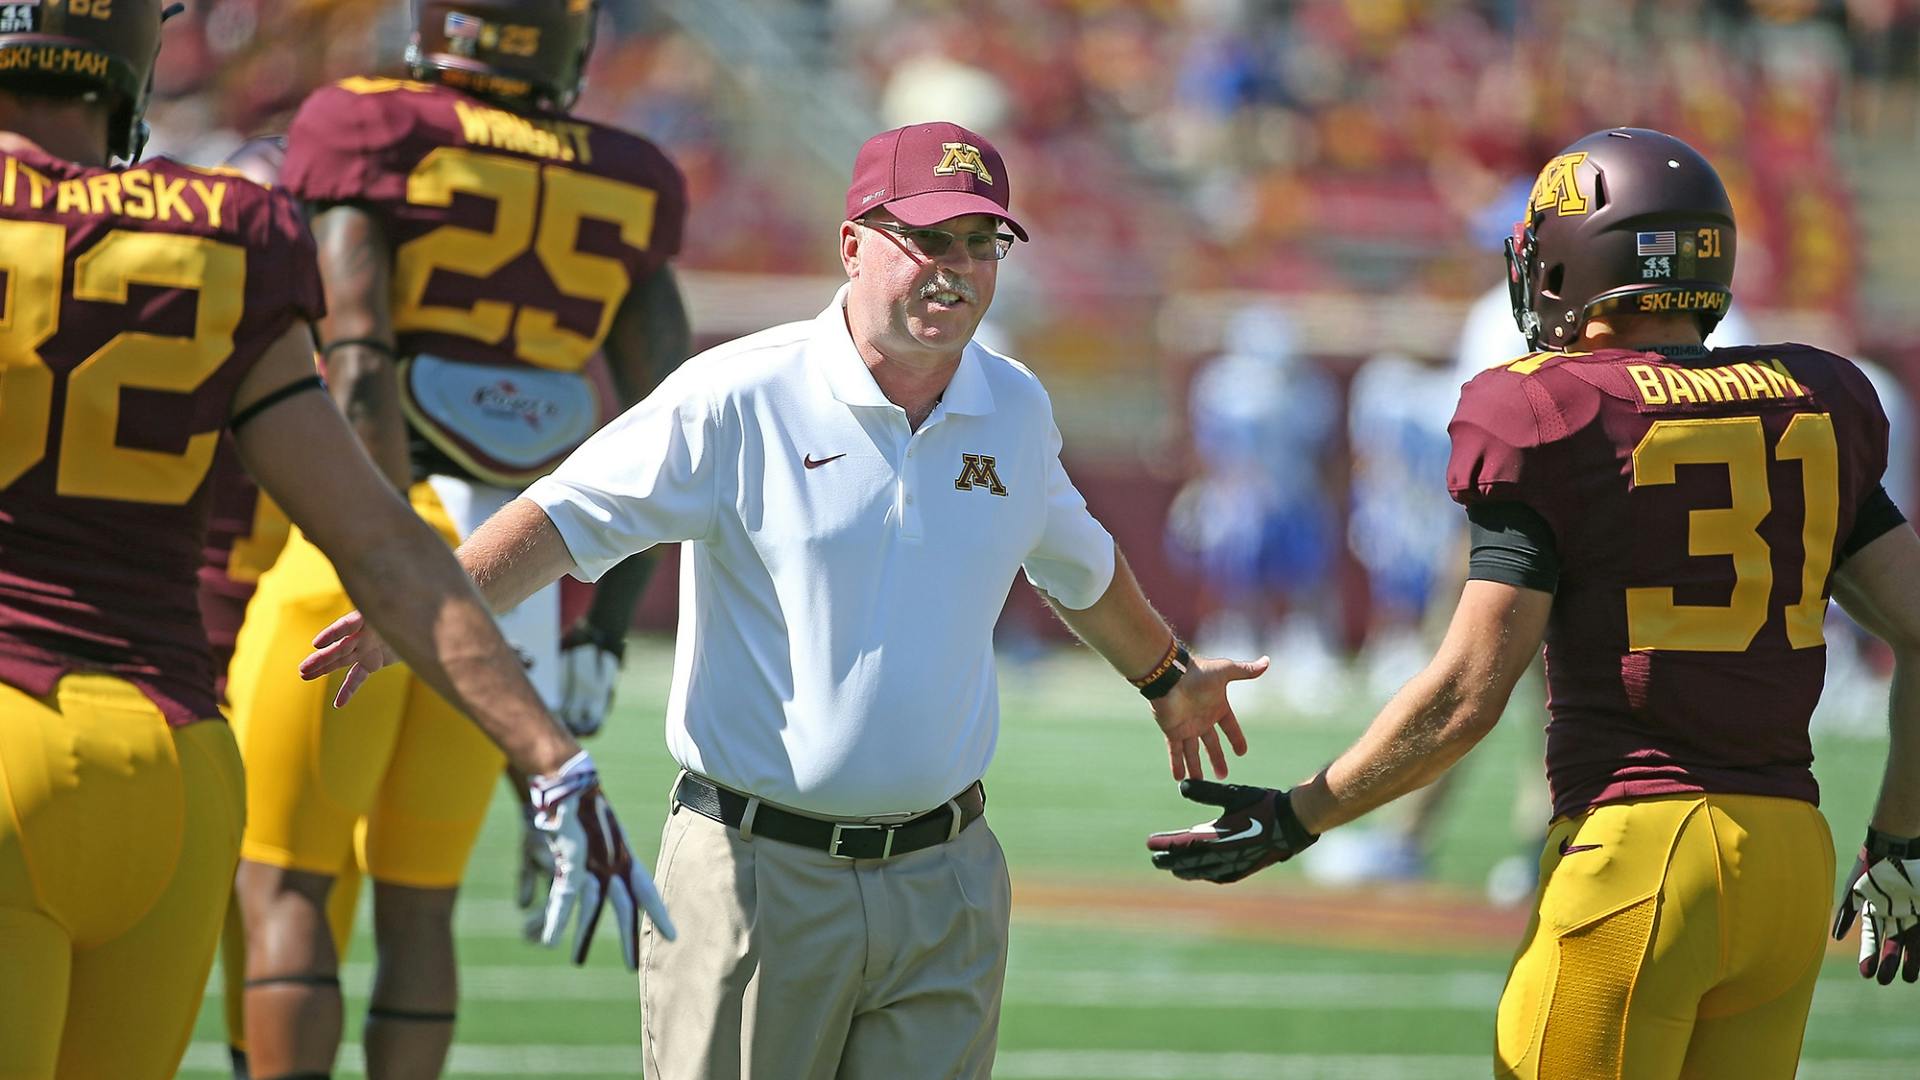 Gophers coach Jerry Kill discusses Saturday's win over Middle Tennessee State.